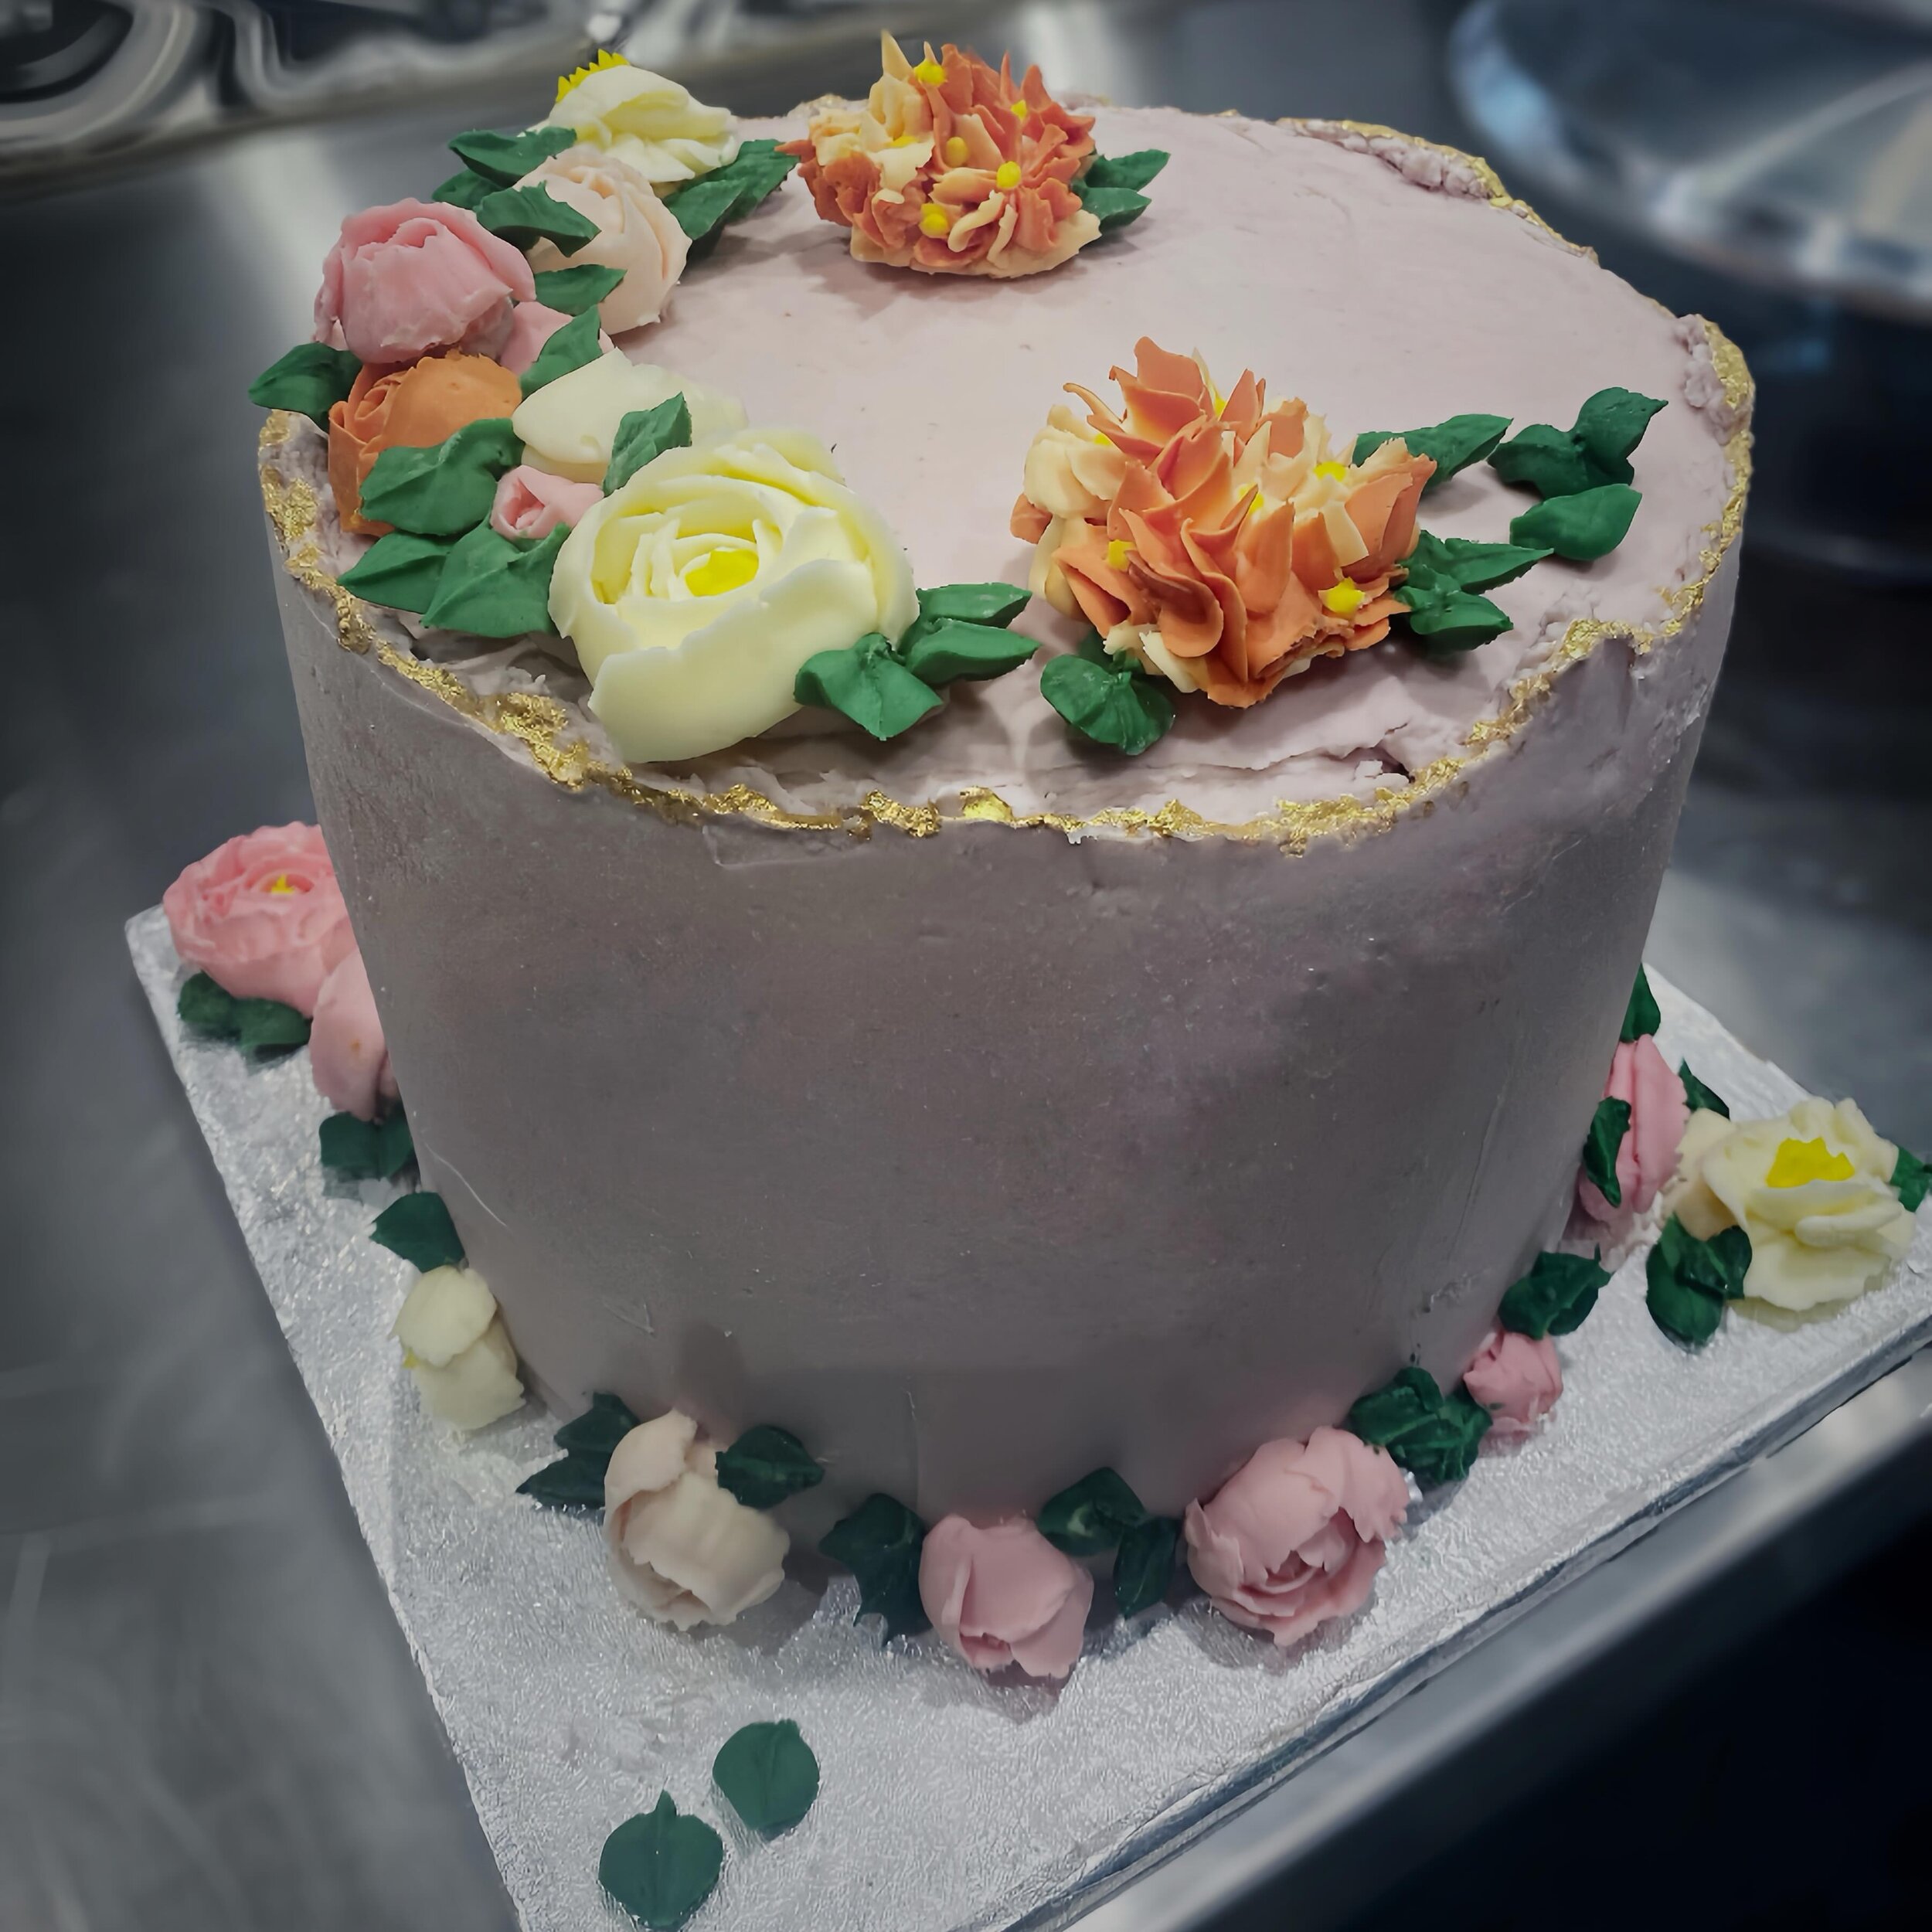 Happy Sunday 😎 

Customer has requested a 9&rdquo; tall lemon chiffon sponge cake filled with raspberry swiss meringue buttercream. We&rsquo;ve also decorated the cake with some hand-piped buttercream flowers inspired by their birthday invitation ca